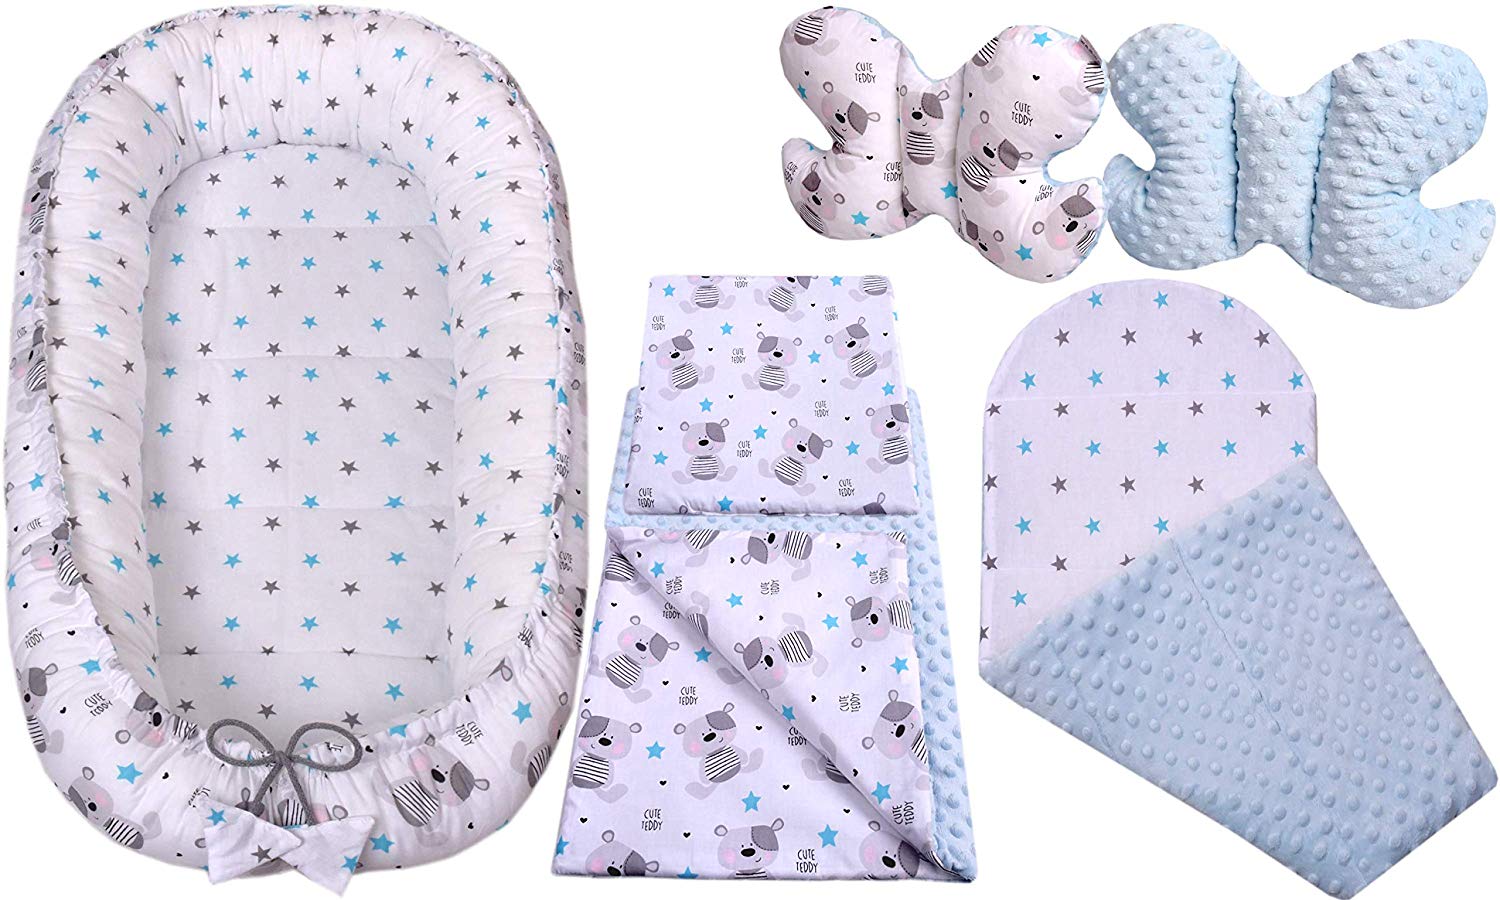 Medi Partners 5-Piece Baby Nest Set, 90 x 50 cm, Removable Insert Bed, Cuddly Nest, Crawling Blanket for Babies, Newborns, 100% Cotton (Teddy Bear with Light Pink Minky)